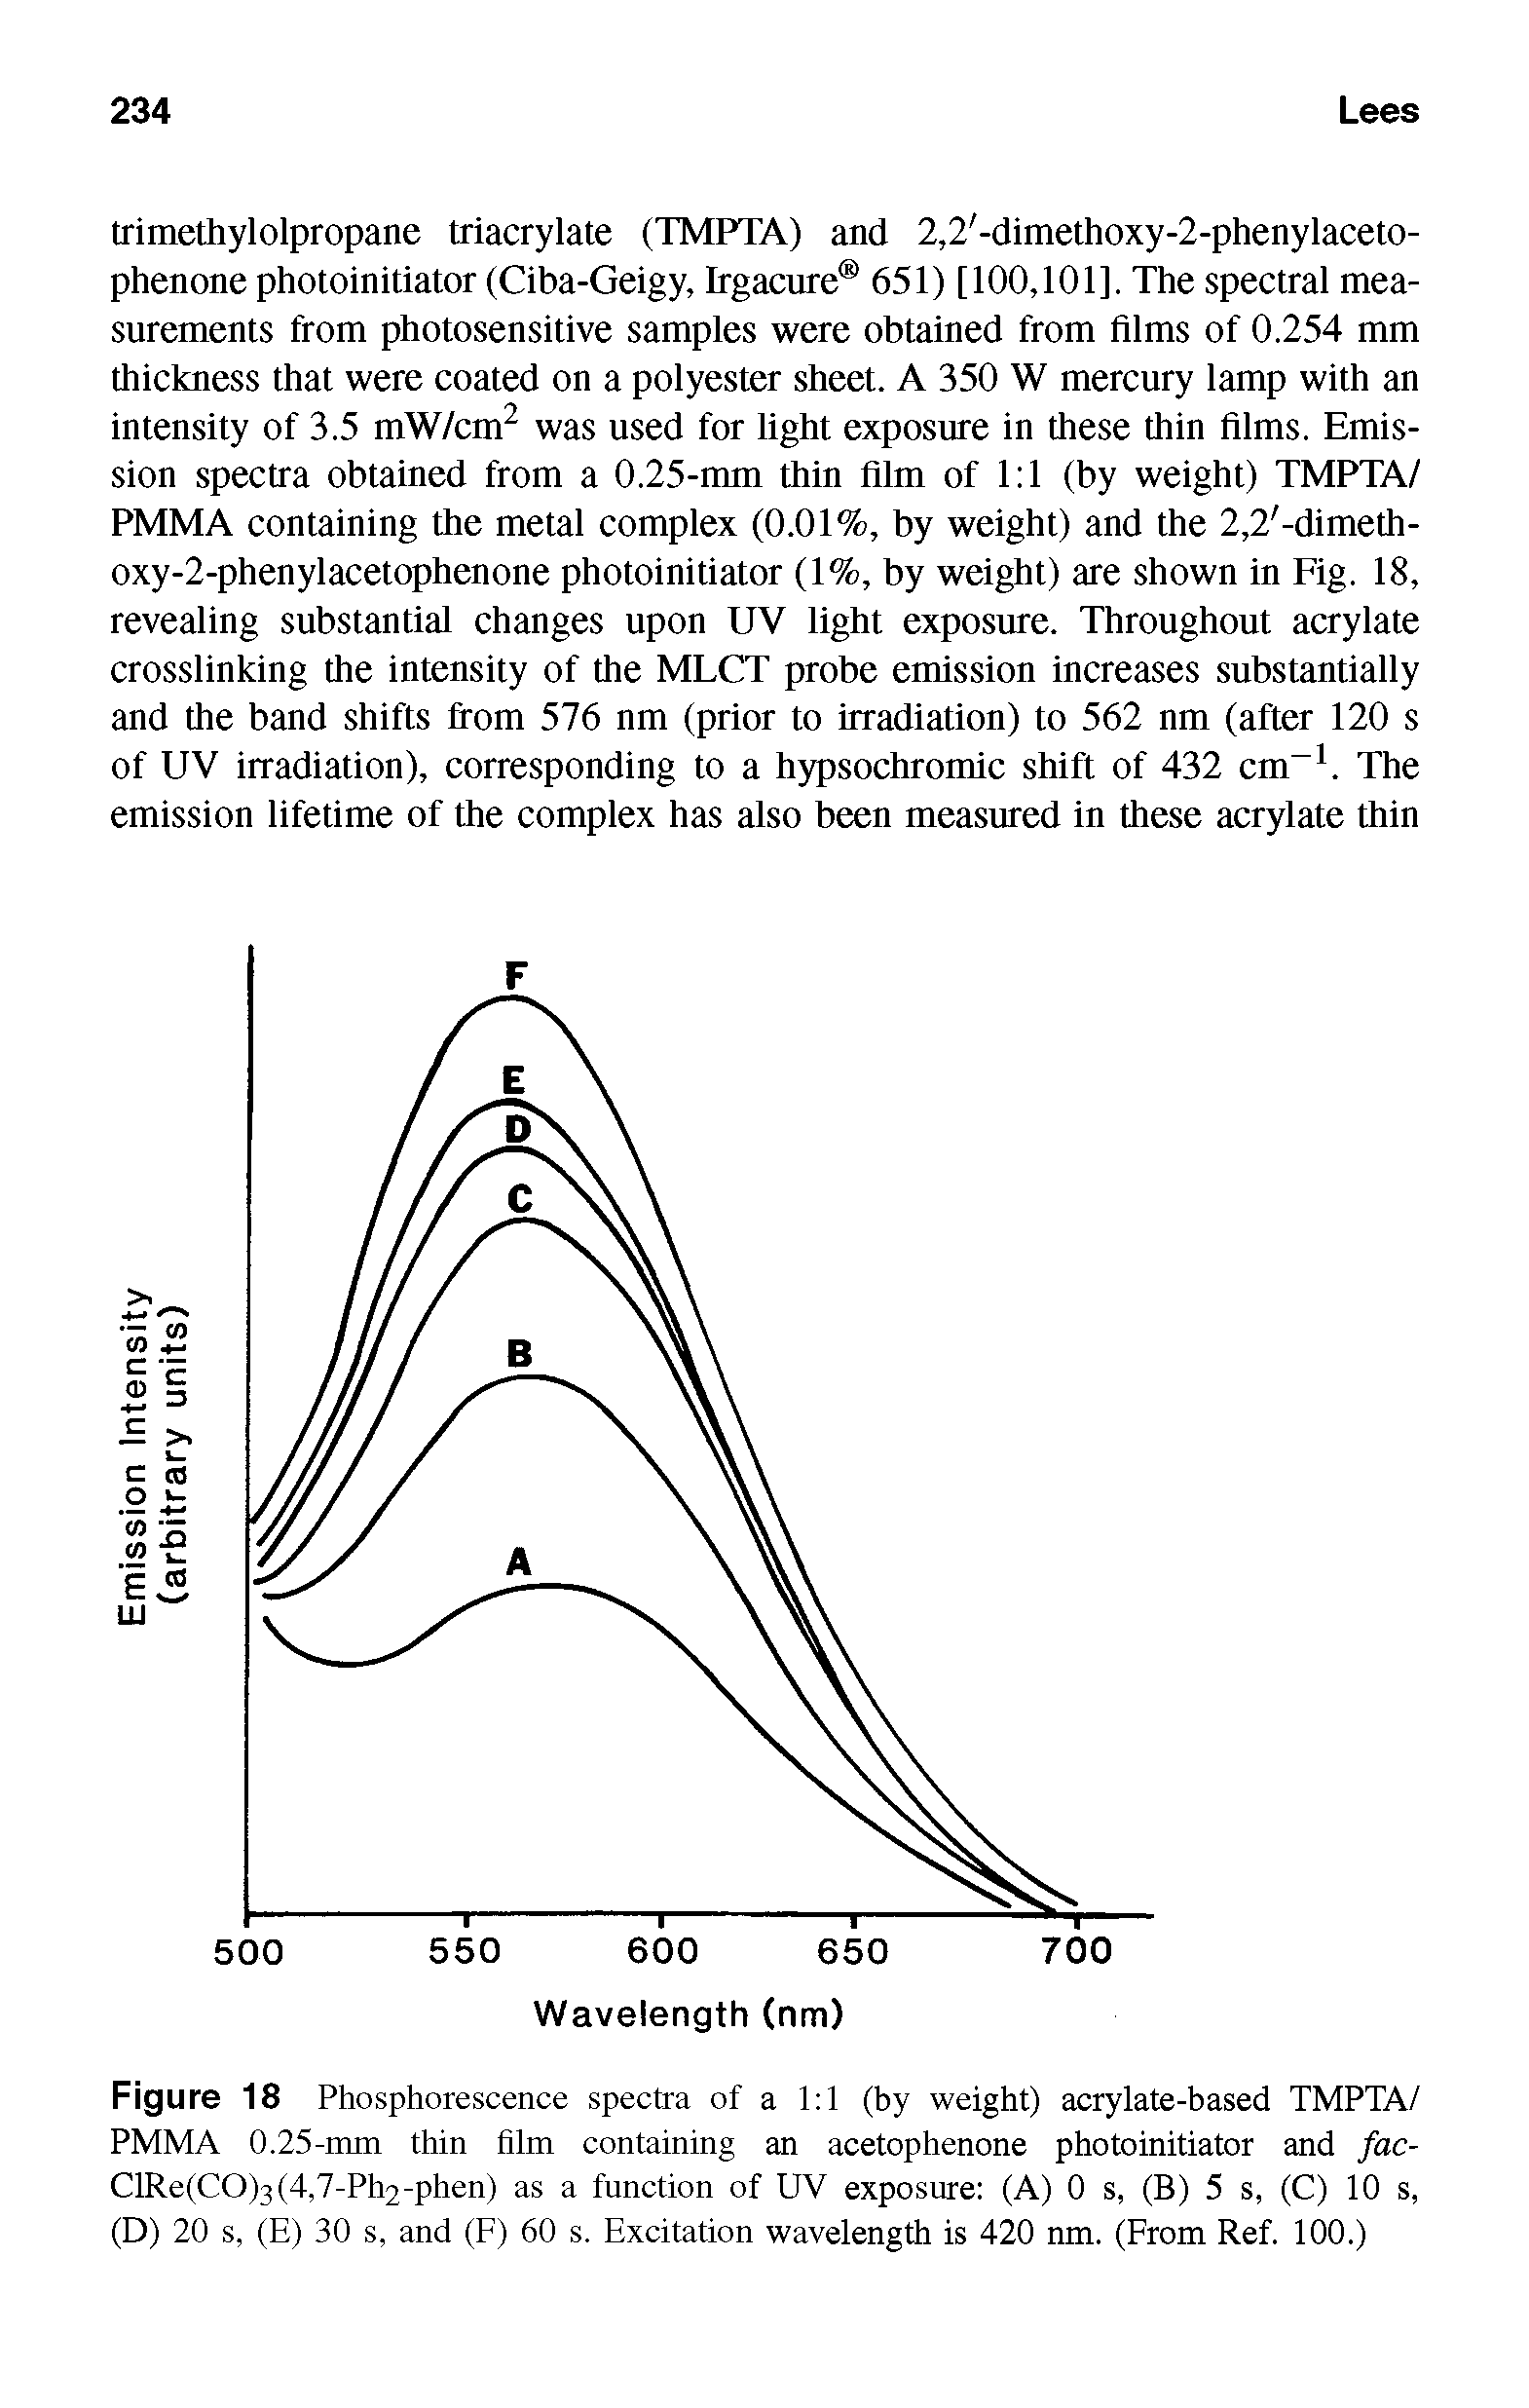 Figure 18 Phosphorescence spectra of a 1 1 (by weight) acrylate-based TMPTA/ PMMA 0.25-mm thin film containing an acetophenone photoinitiator and fac-ClRe(CO)3(4,7-Ph2-phen) as a function of UV exposure (A) 0 s, (B) 5 s, (C) 10 s, (D) 20 s, (E) 30 s, and (F) 60 s. Excitation wavelength is 420 nm. (From Ref. 100.)...